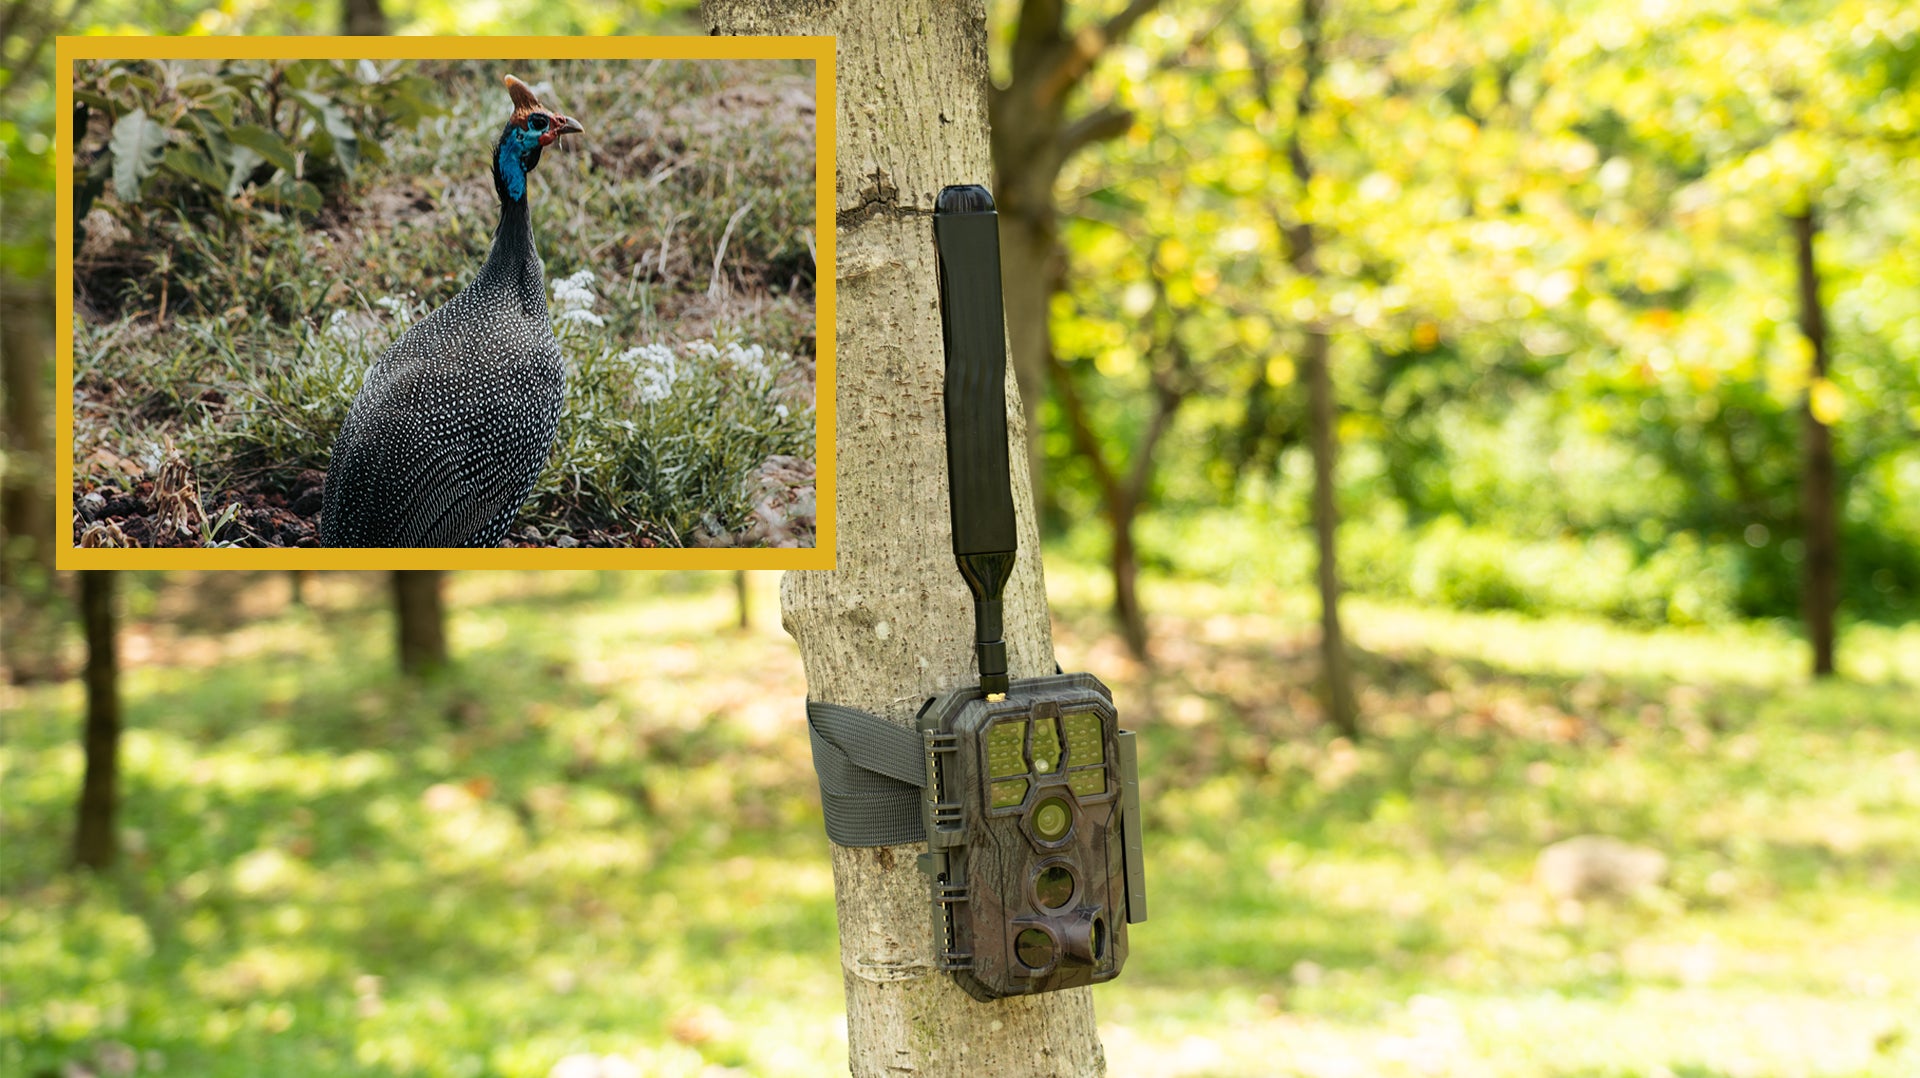 How to activate GardePro 4G LTE Cellular Trail Camera?